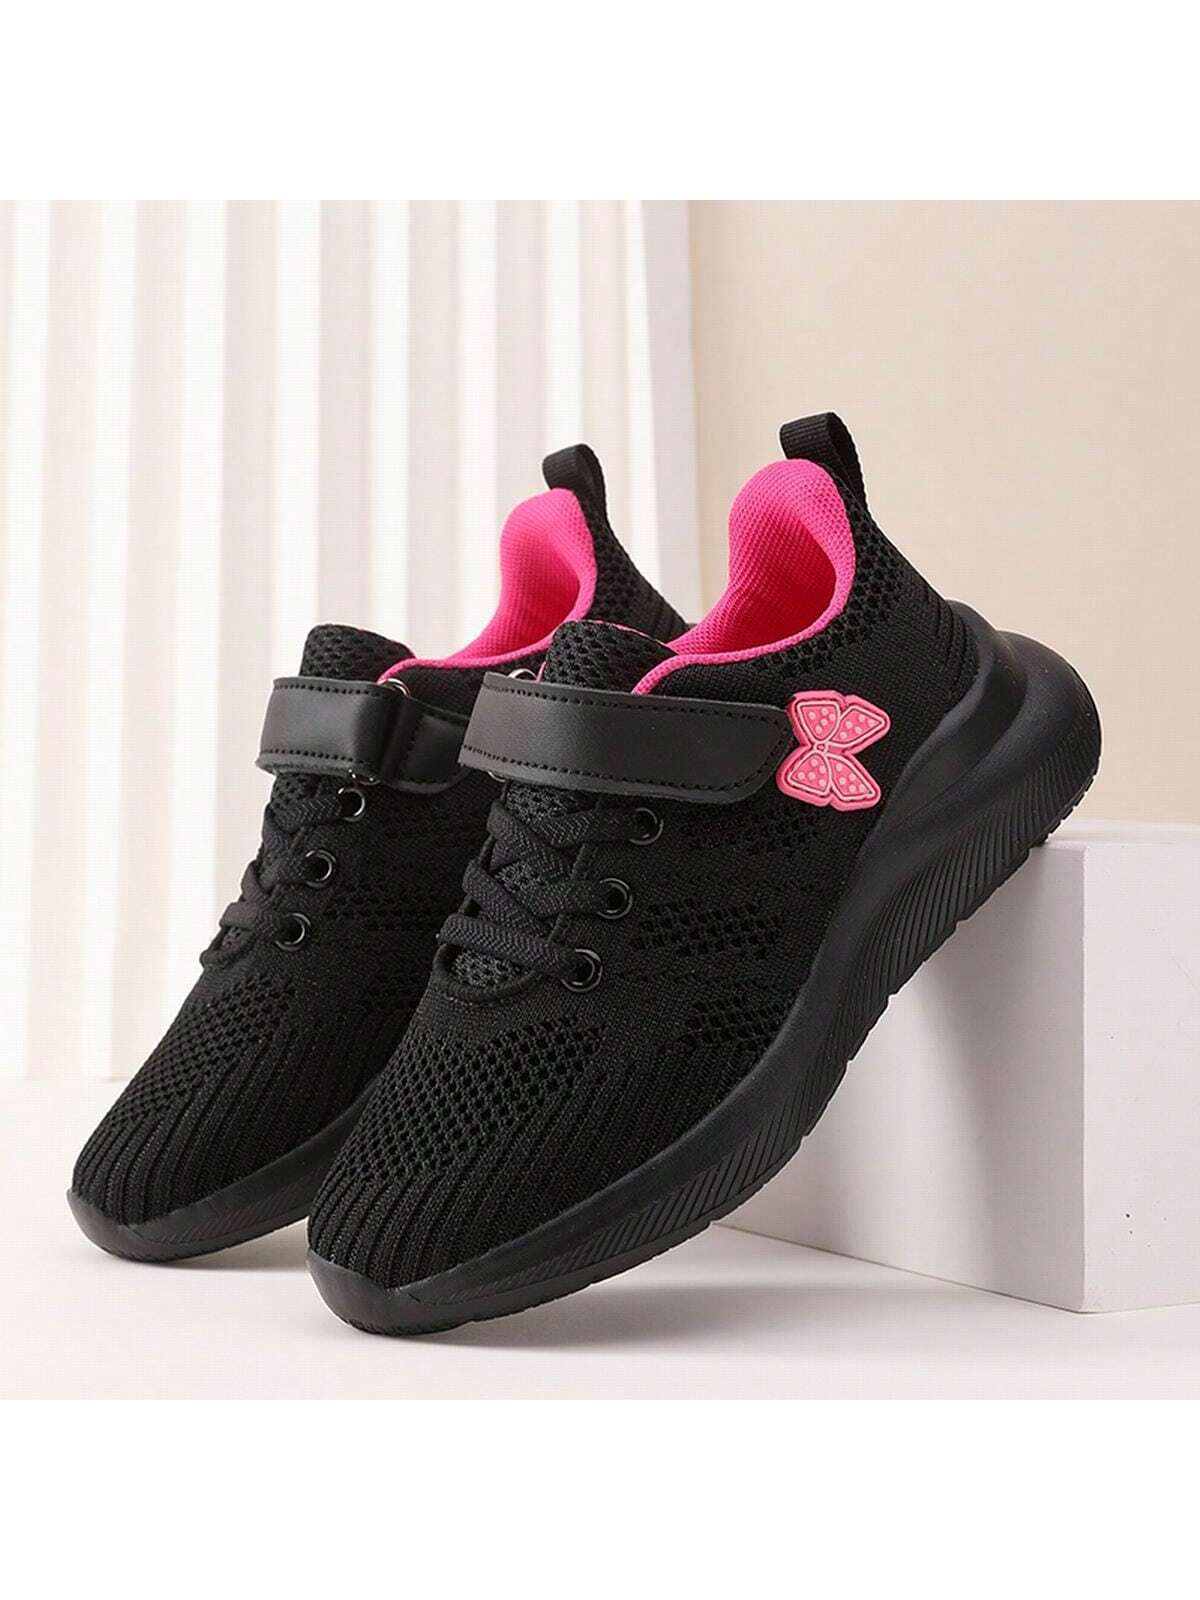 1 Pair Lightweight & Comfortable Women'S Athletic Shoes, Casual Breathable Mesh Running Shoes, All-Match Summer Sneakers-Black-4